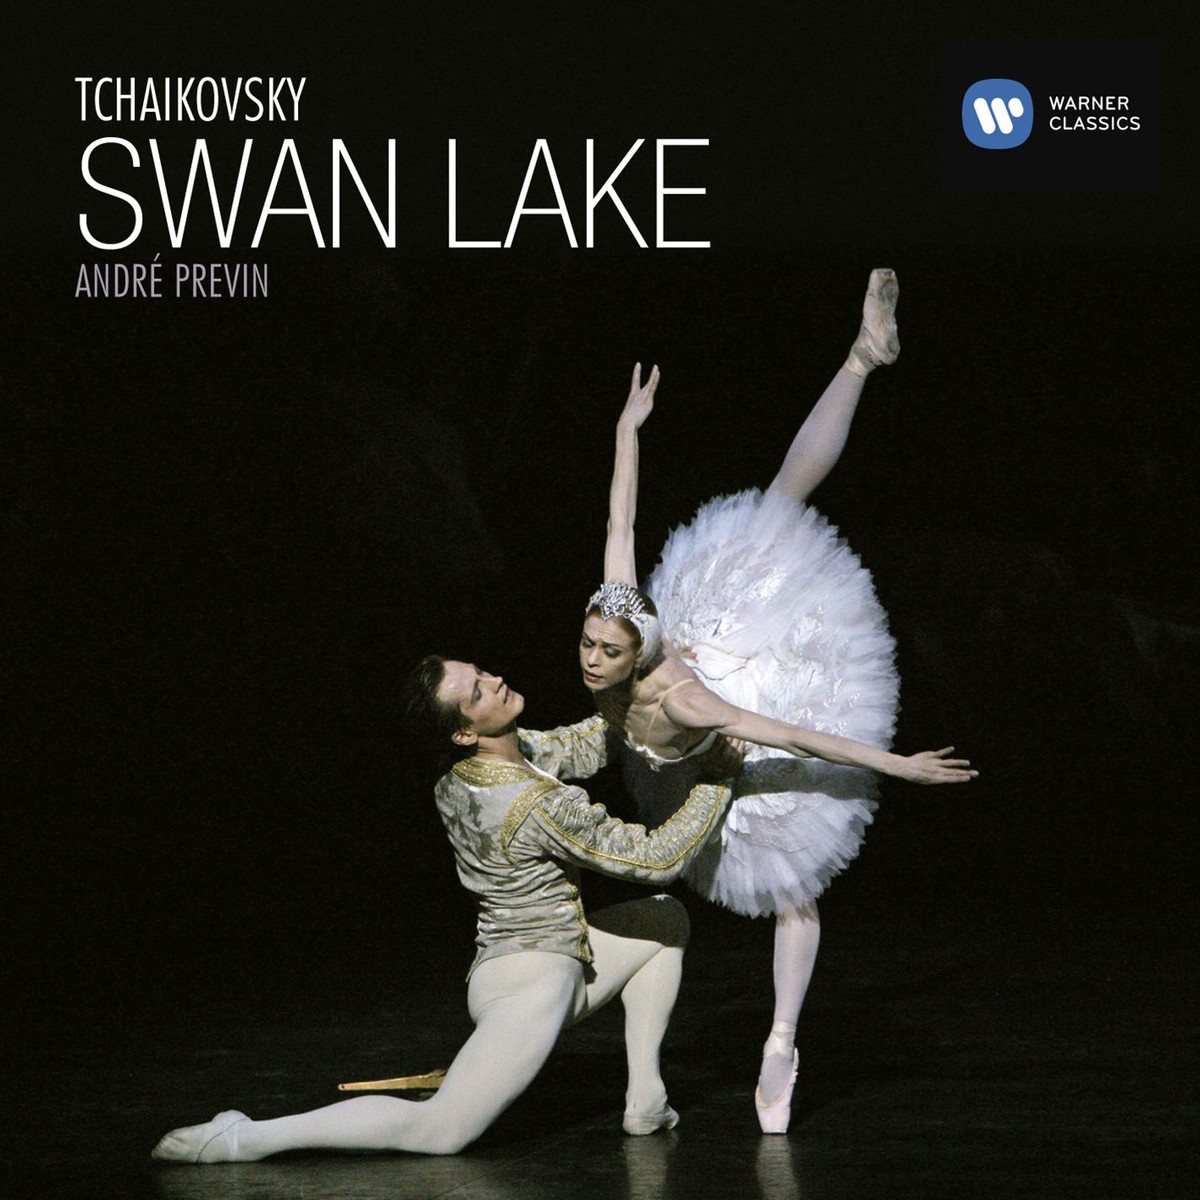 Swan Lake - Ballet in four acts Op. 20, Act II, 13. Dances of the Swans: VII.   Coda (Allegro vivace)